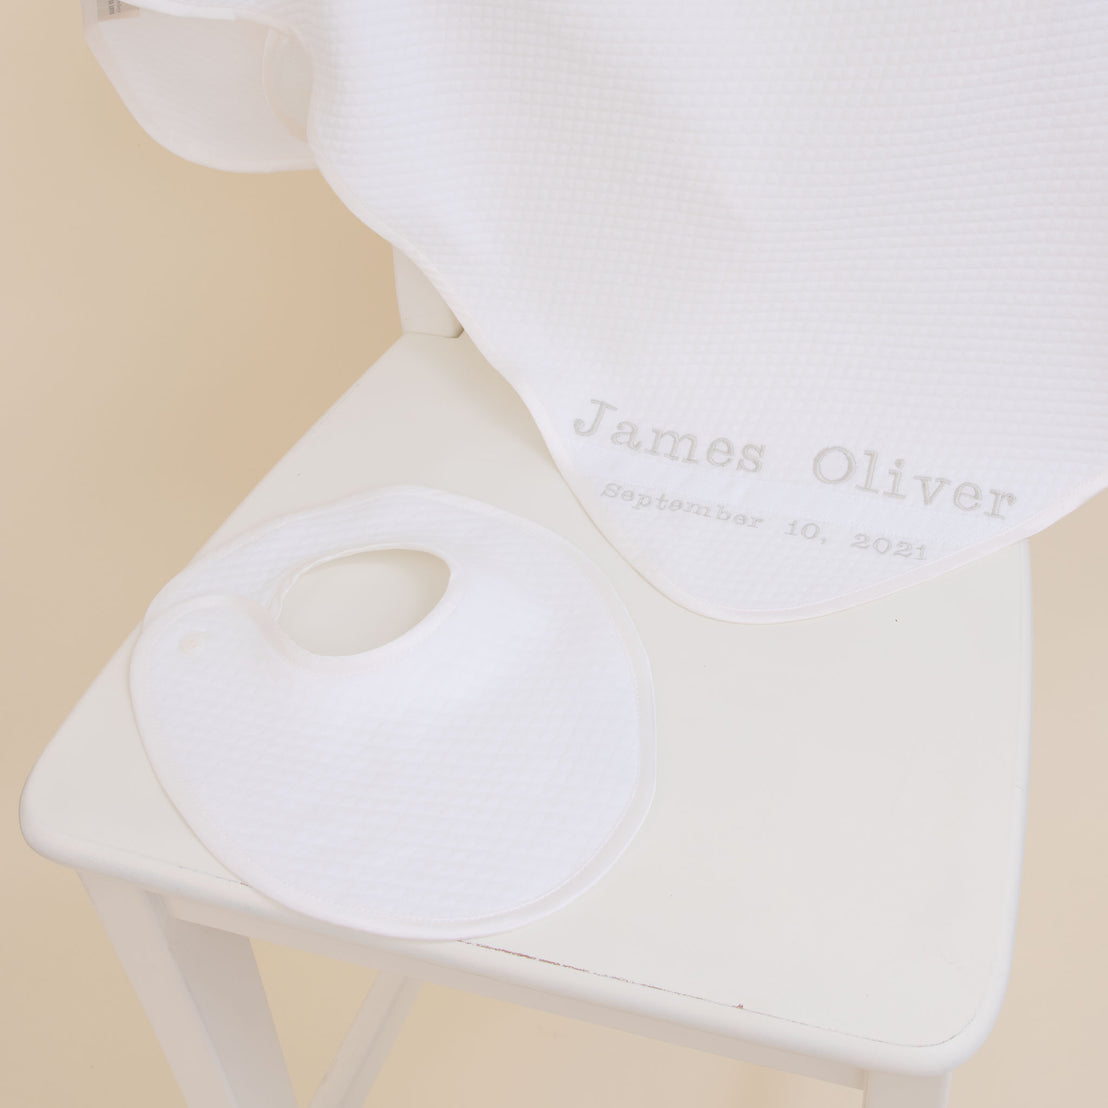 A Baby Beau & Belle quilted cotton blanket and cloth with the embroidered name "james oliver" and date "september 10, 2021", placed on a white wooden chair against a beige background